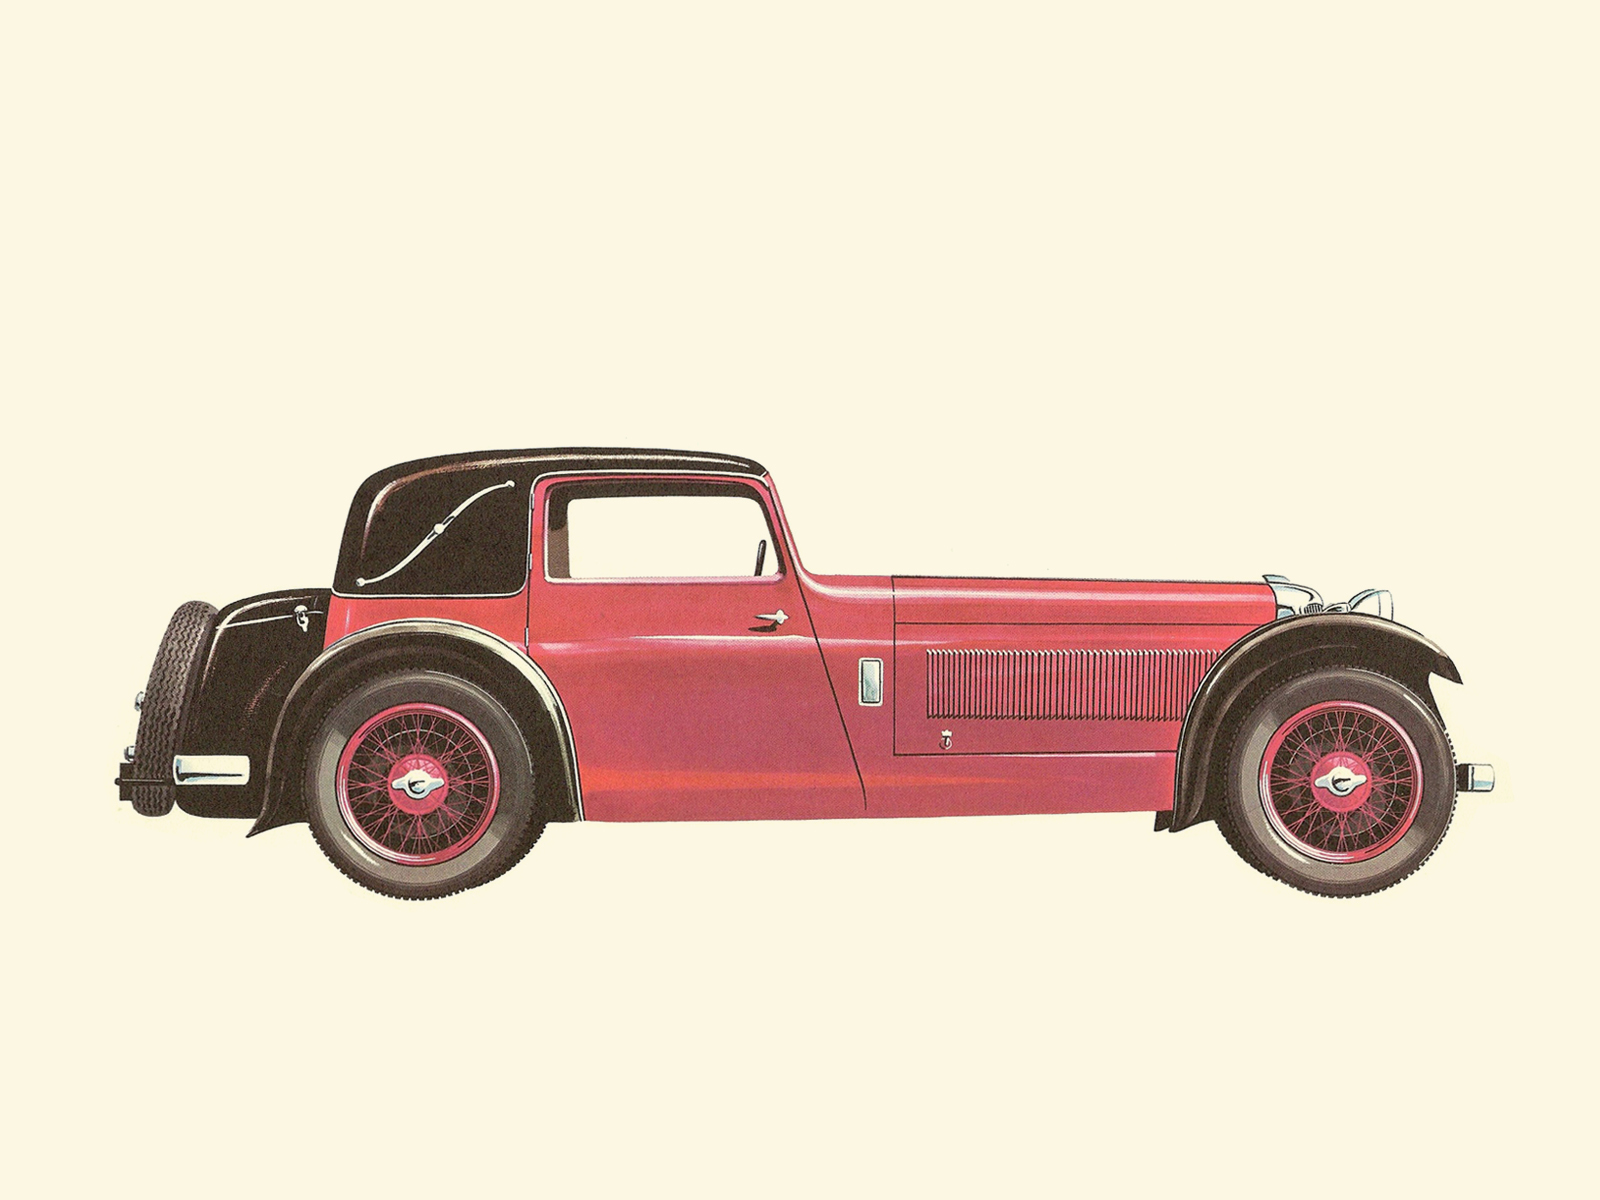 1932 S.S. (Standard Swallow) 1 - Illustrated by Pierre Dumont